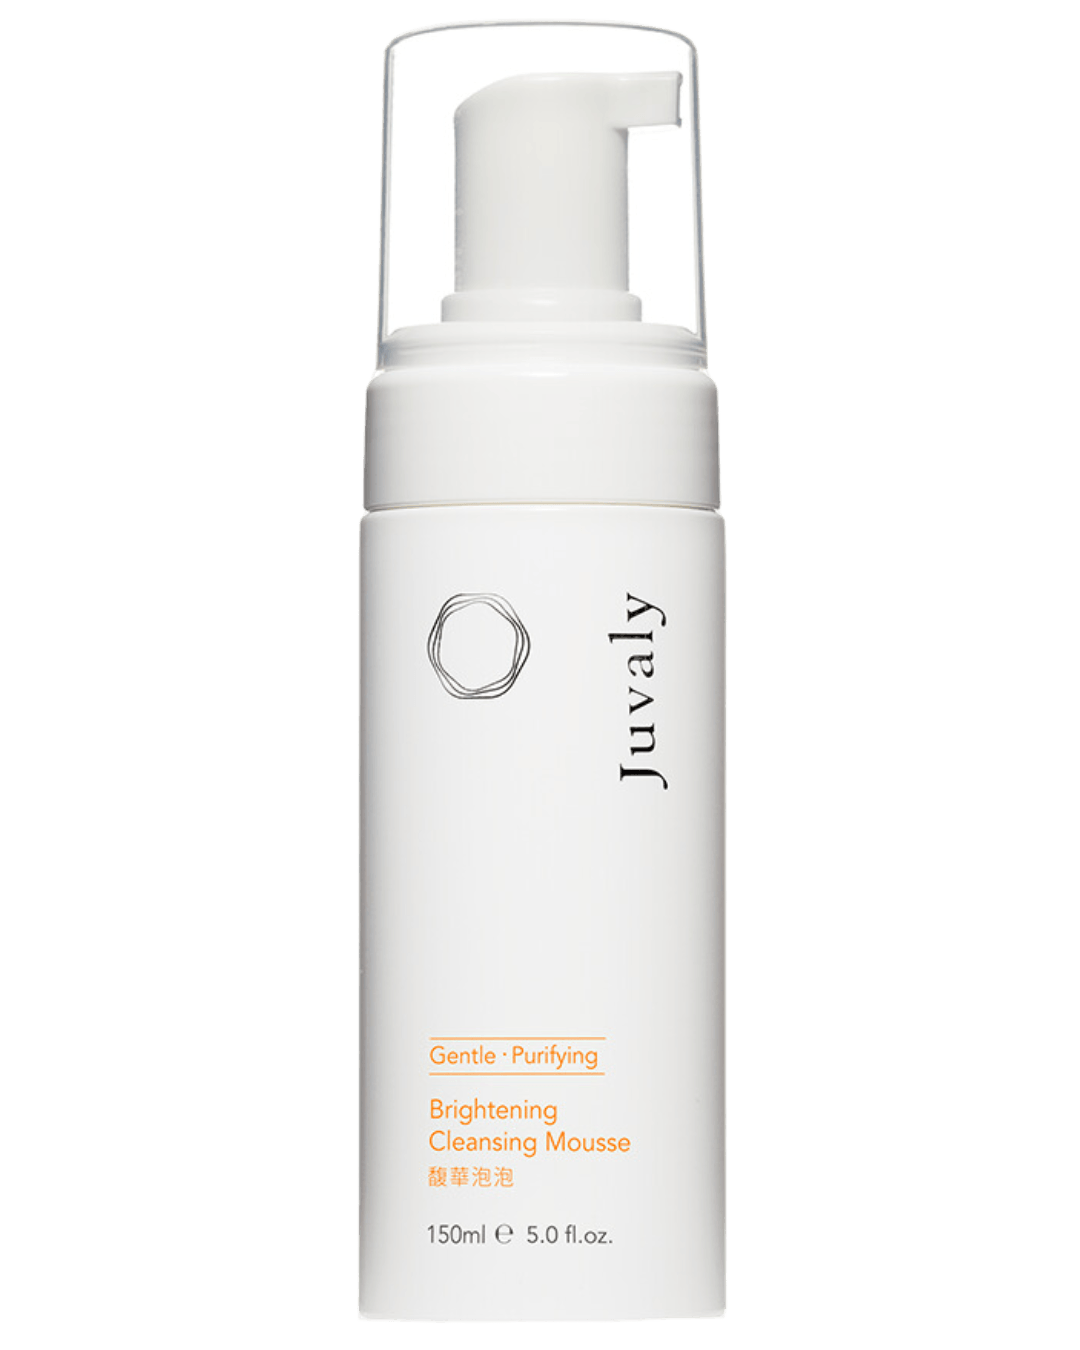 Daily Vanity Beauty Awards 2024 Best Skincare Juvaly Brightening Cleansing Mousse Voted By Beauty Experts